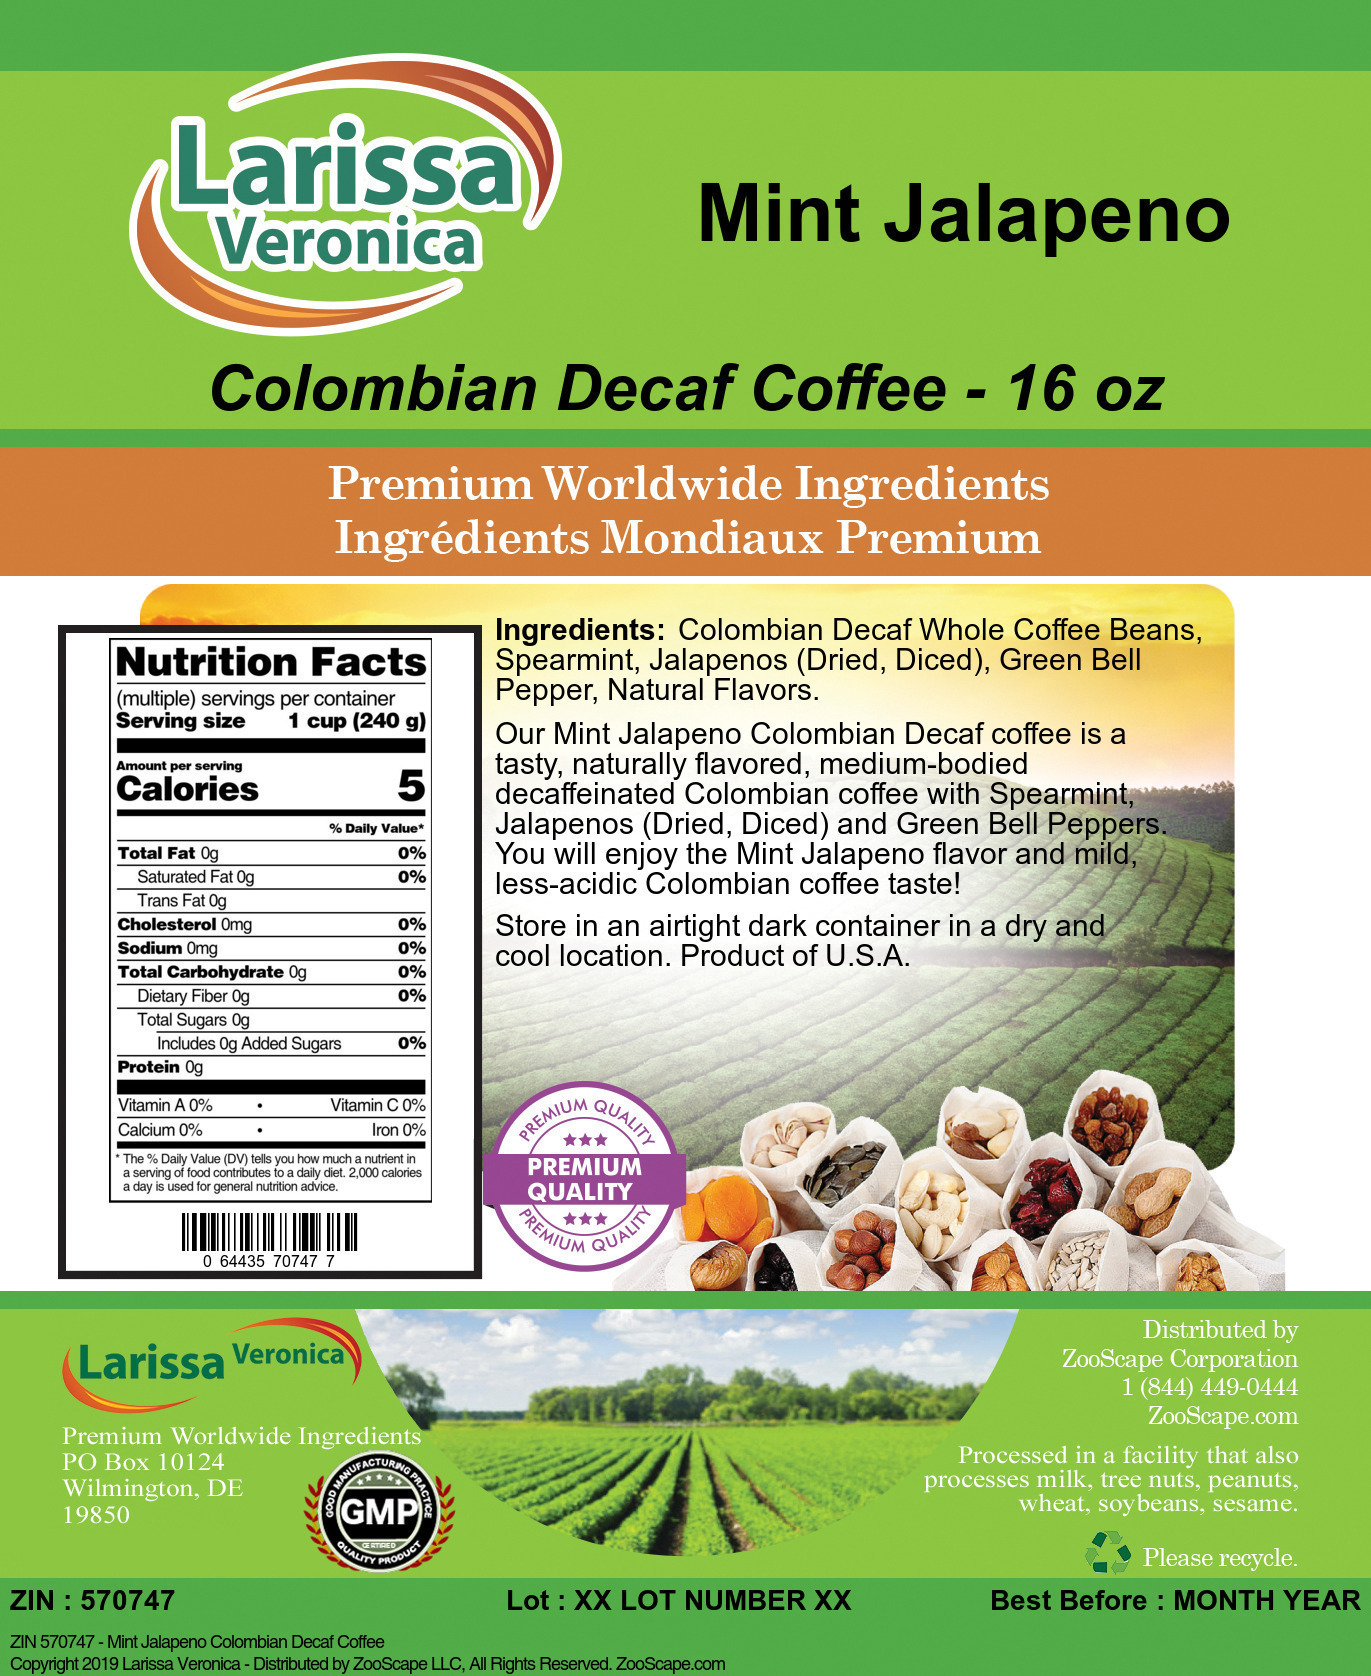 Mint Jalapeno Colombian Decaf Coffee - Label